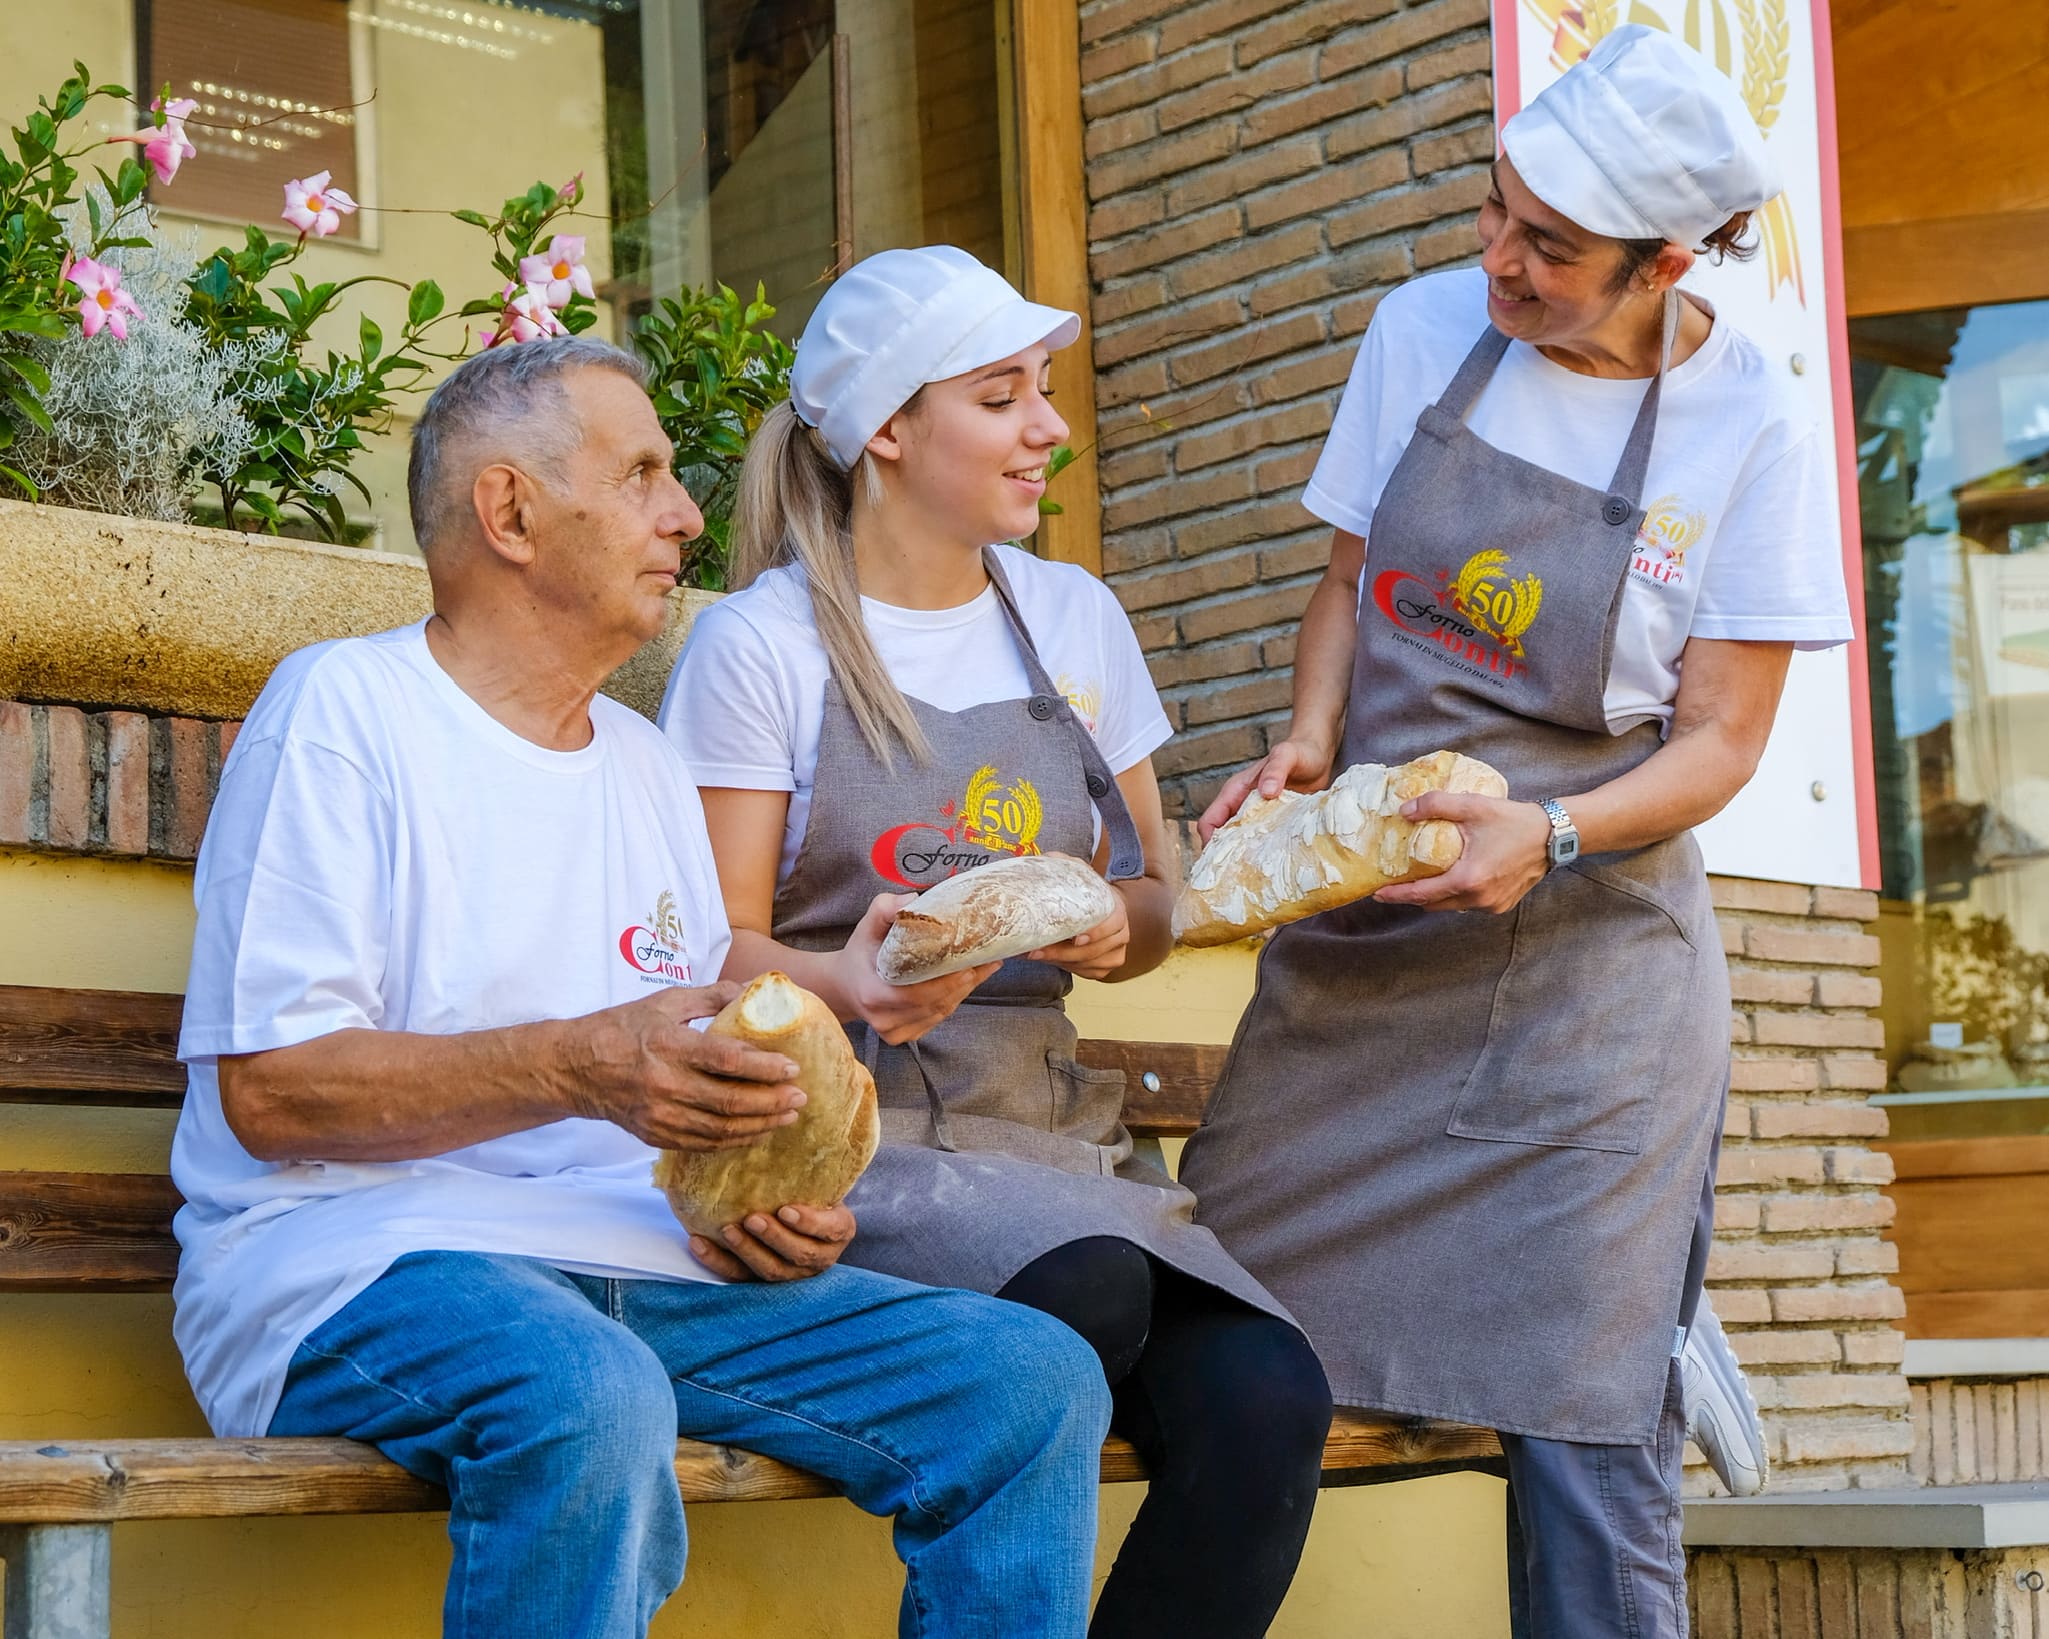 The Forno Conti and the tradition of artisan bread